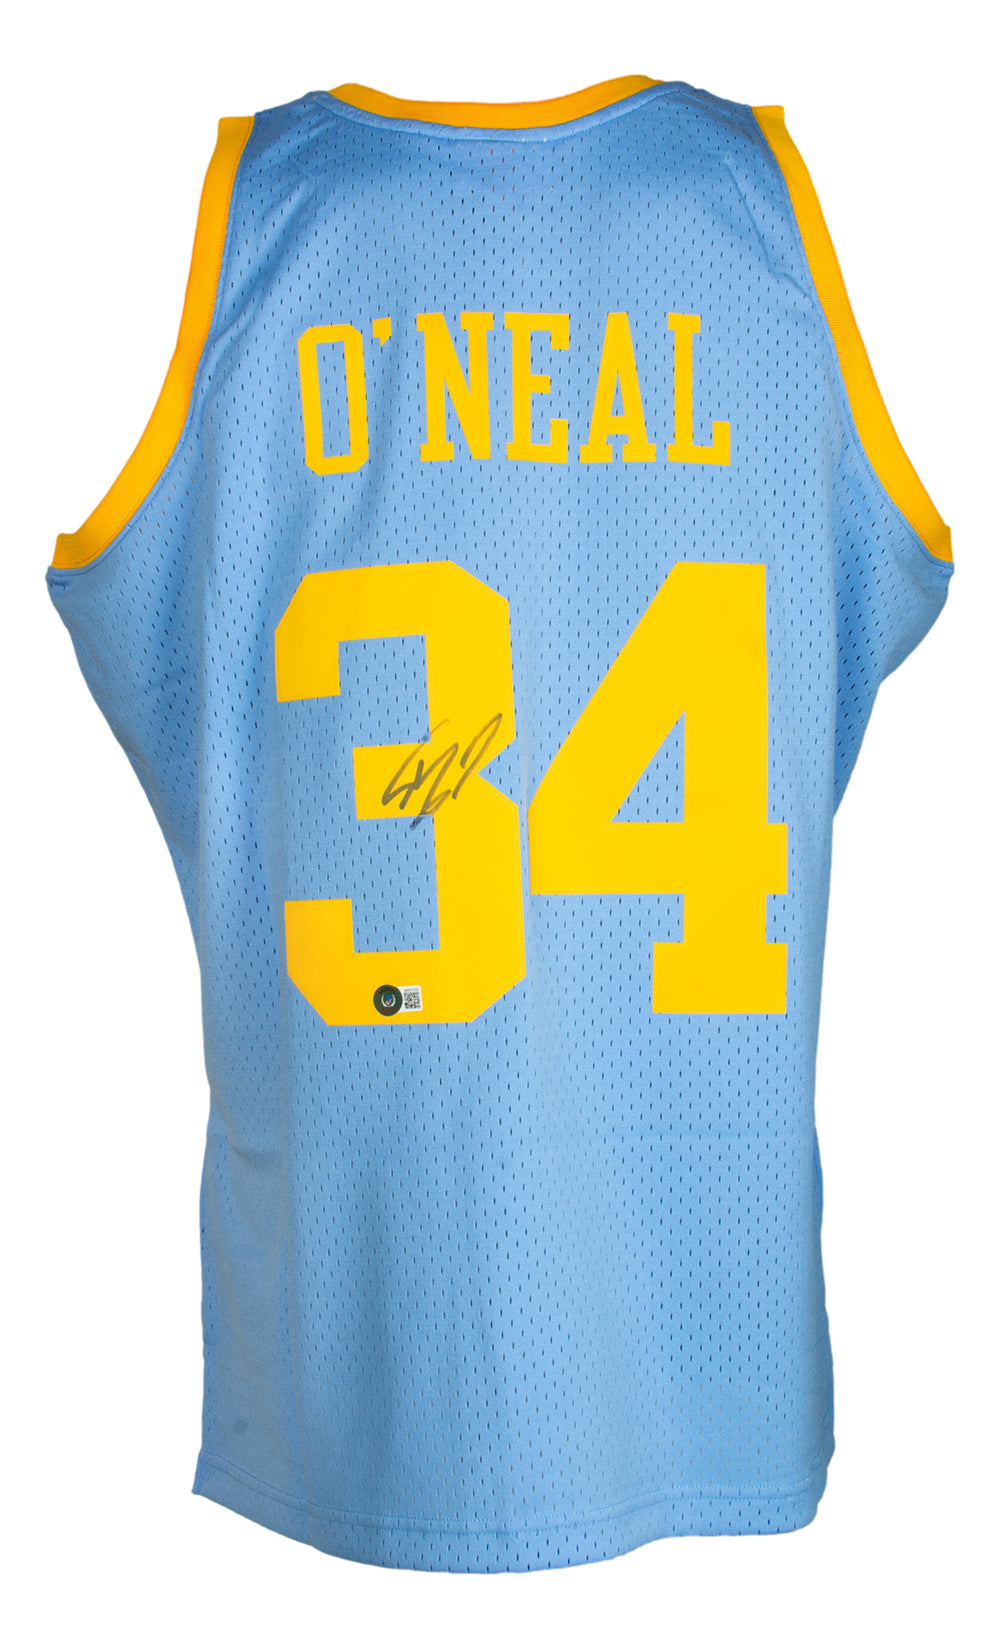 lakers blue jersey mpls